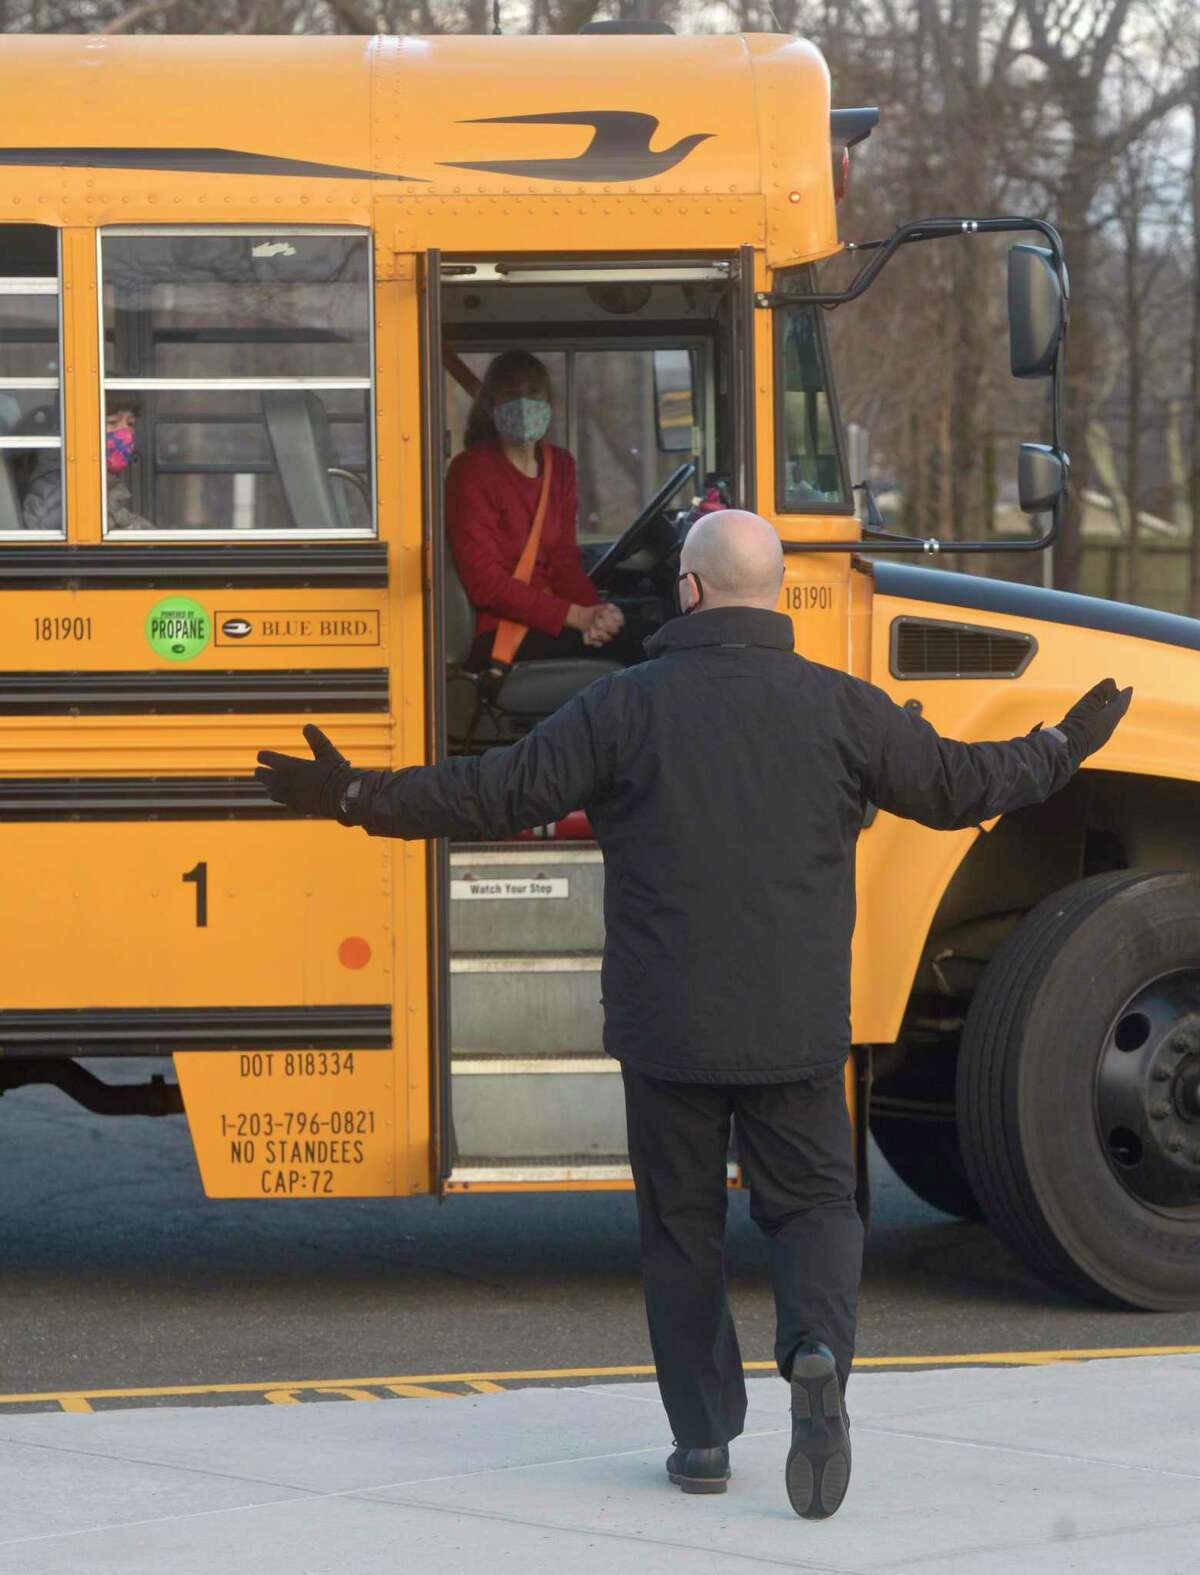 Stadley Rough Elementary School Principal Lenny Cerlich welcomes students and their bus driver back to school for the first time since March of last year. Tuesday, January 19, 2021, in Danbury, Conn.